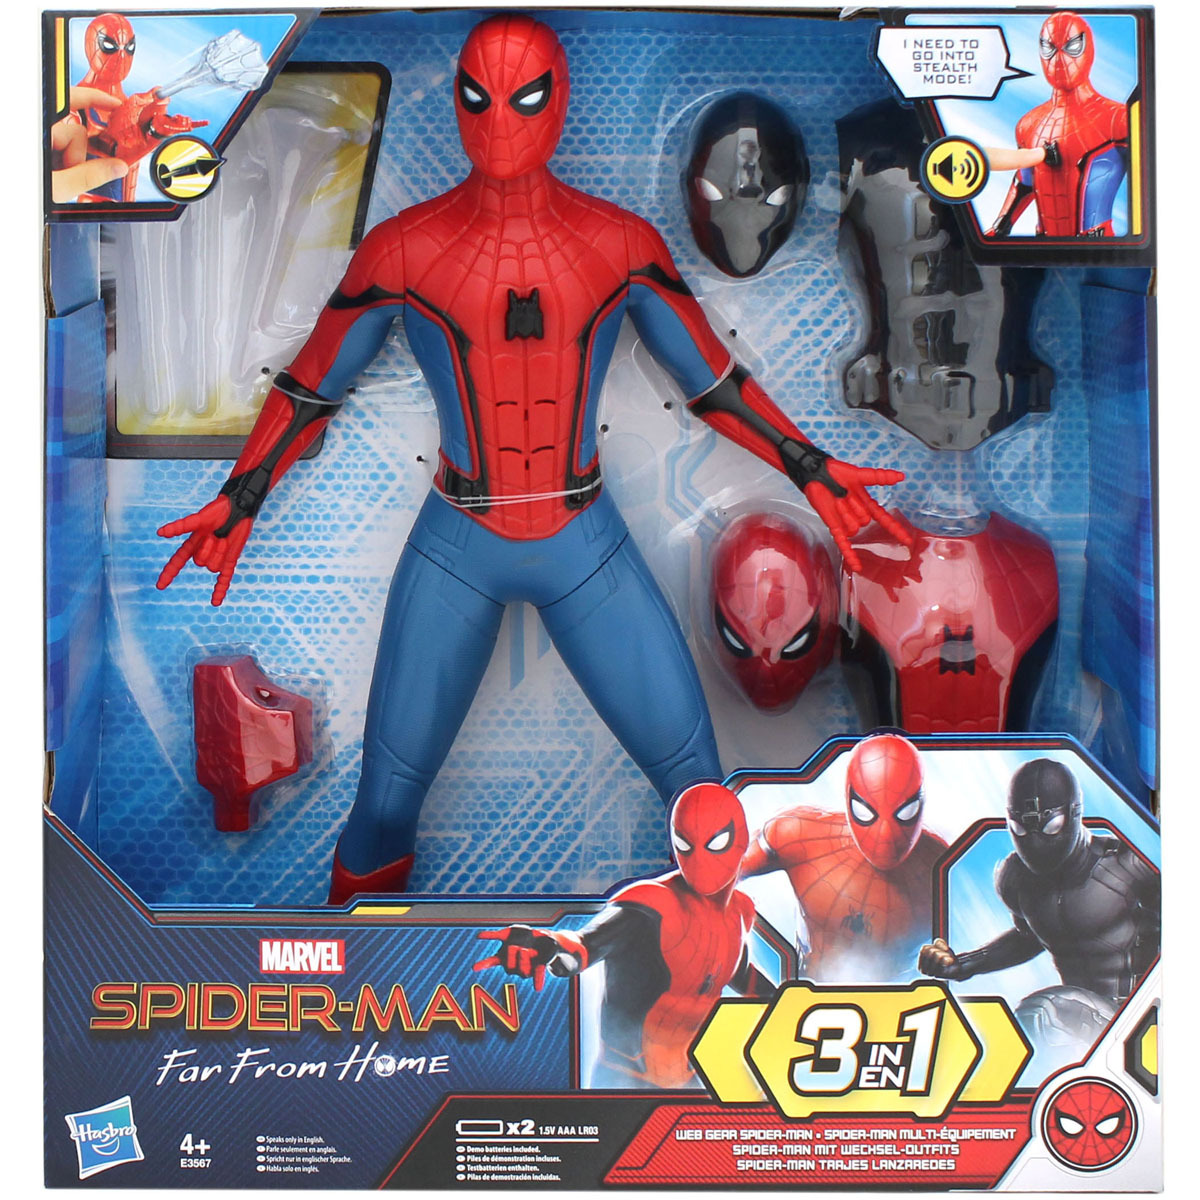 Spiderman - Pack Collection 6 Figurines 30 Cm - H 30 Cm - C1923